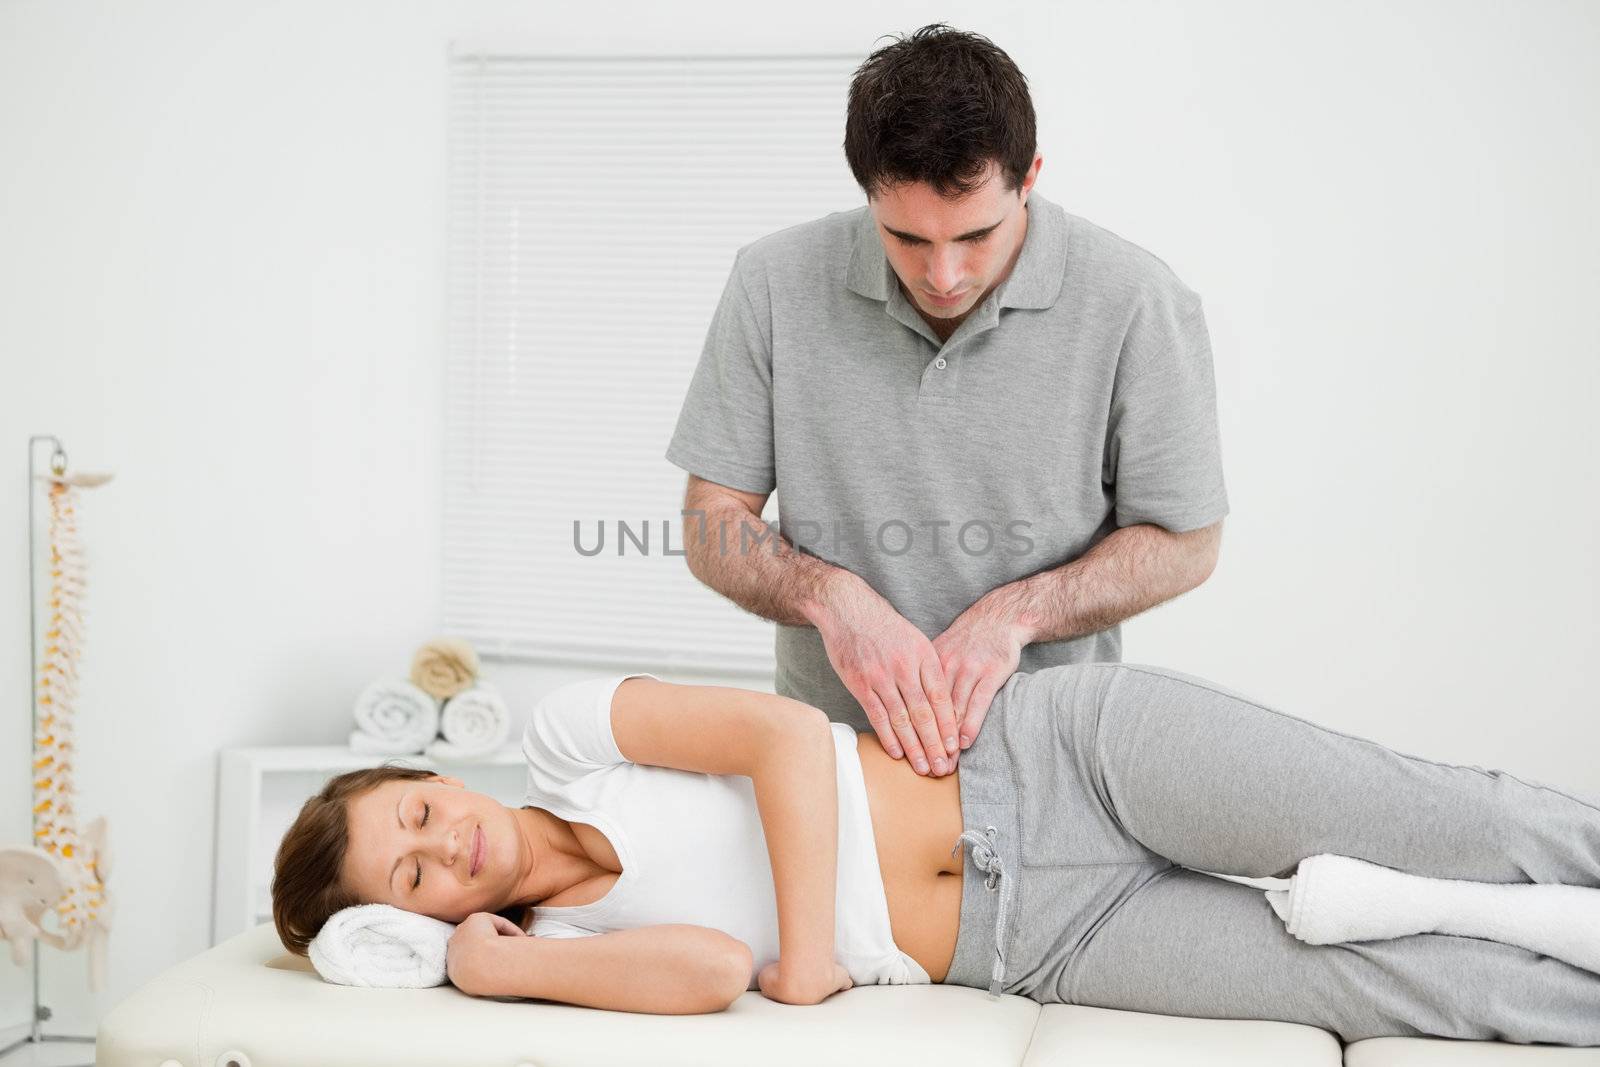 Peaceful woman being massaged on her hip by a doctor in a medical room